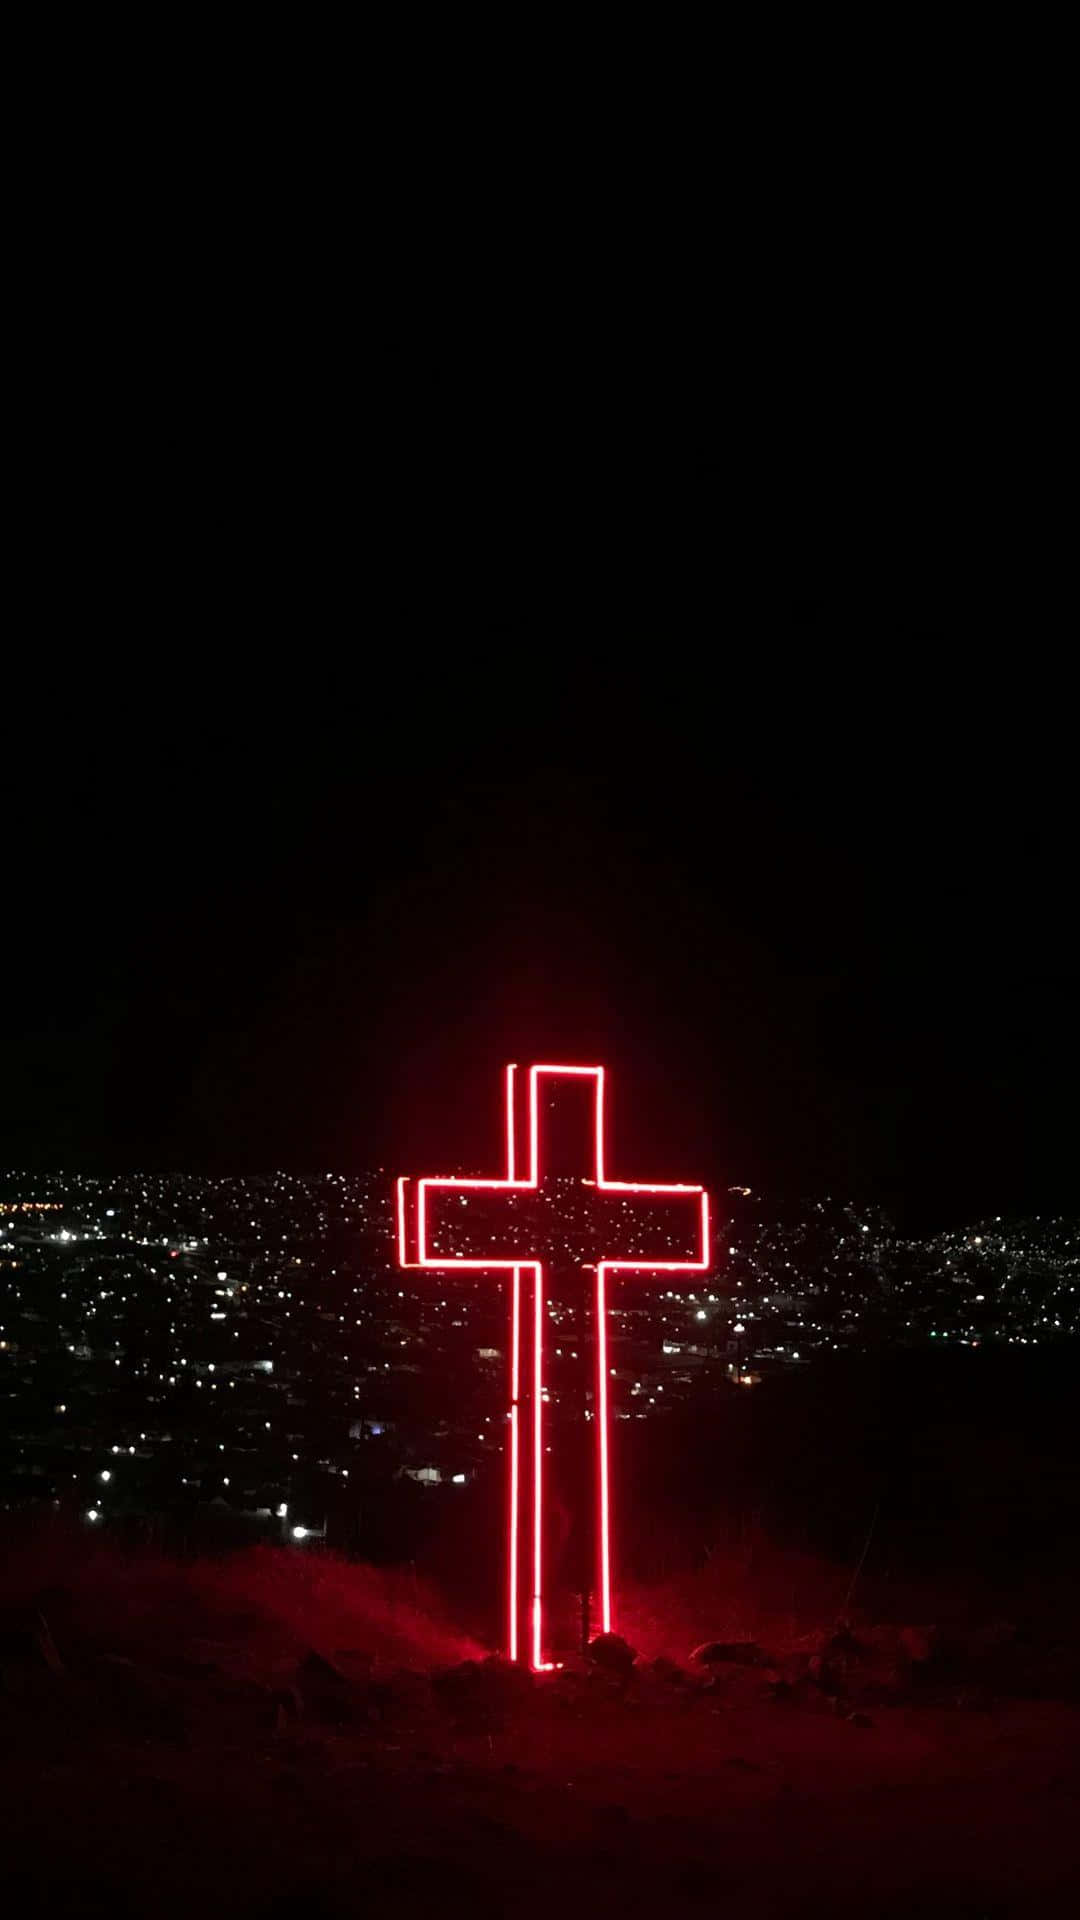 Red cross with black background photo  Free Cross Image on Unsplash